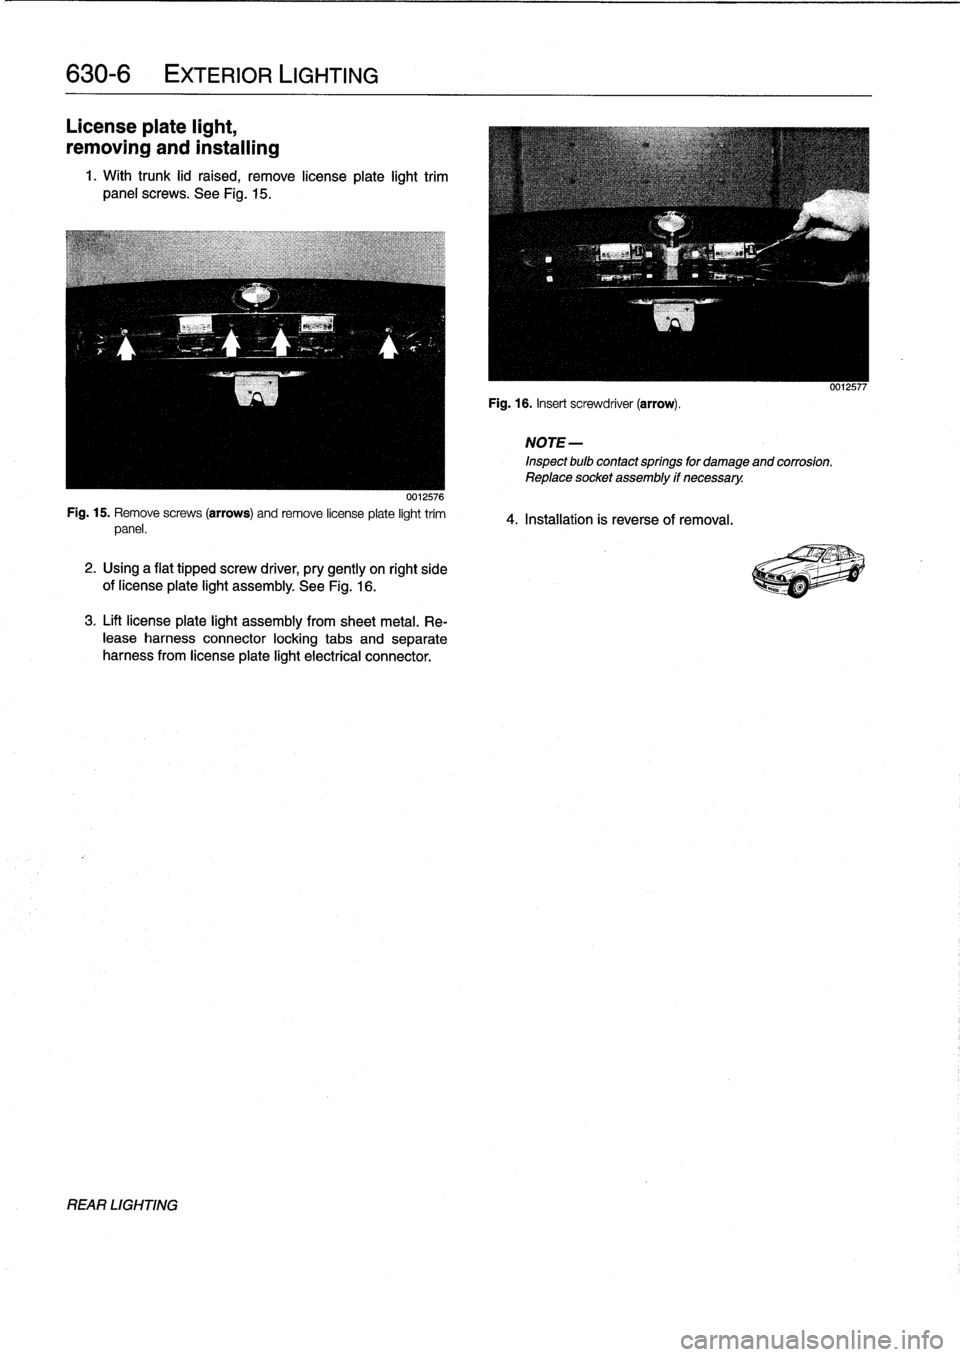 BMW 328i 1994 E36 Workshop Manual 
630-
6

	

EXTERIOR
LIGHTING

License
plate
light,

removing
and
installing

1
.
With
trunk
lid
raised,
remove
lícense
plate
light
trim
panel
screws
.
See
Fig
.
15
.

0012576
Fig
.
15
.
Remove
screw